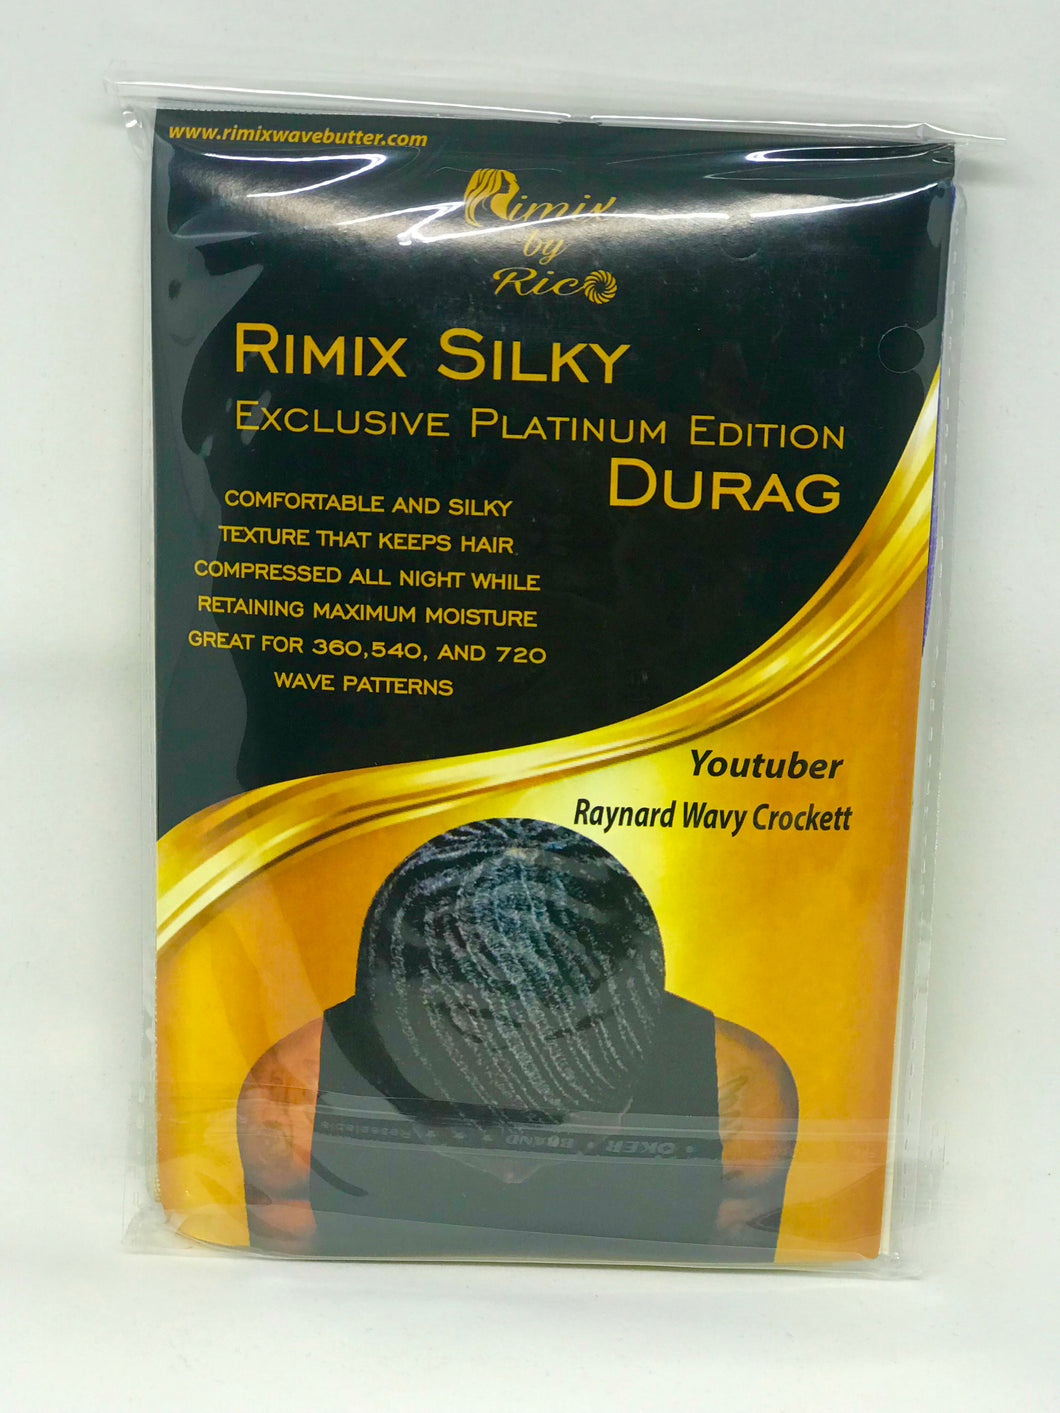 All 6 Rimix Silky Exclusive Platinum Edition Durag (4k Limited Edition)🚨